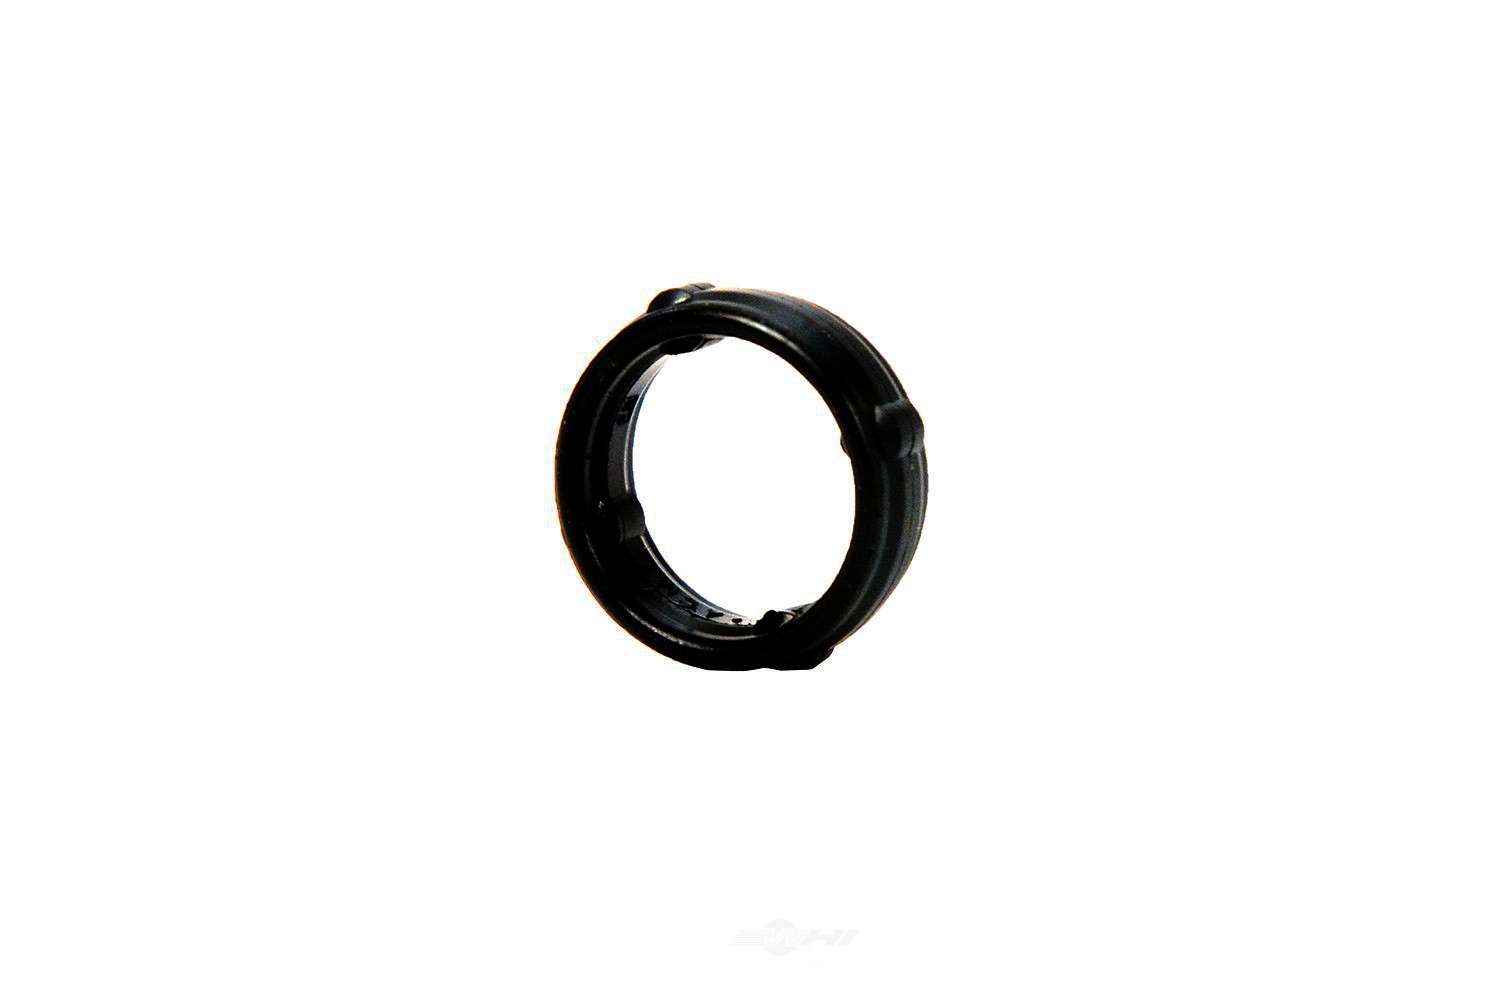 GM GENUINE PARTS - Engine Oil Seal Ring - GMP 12610160